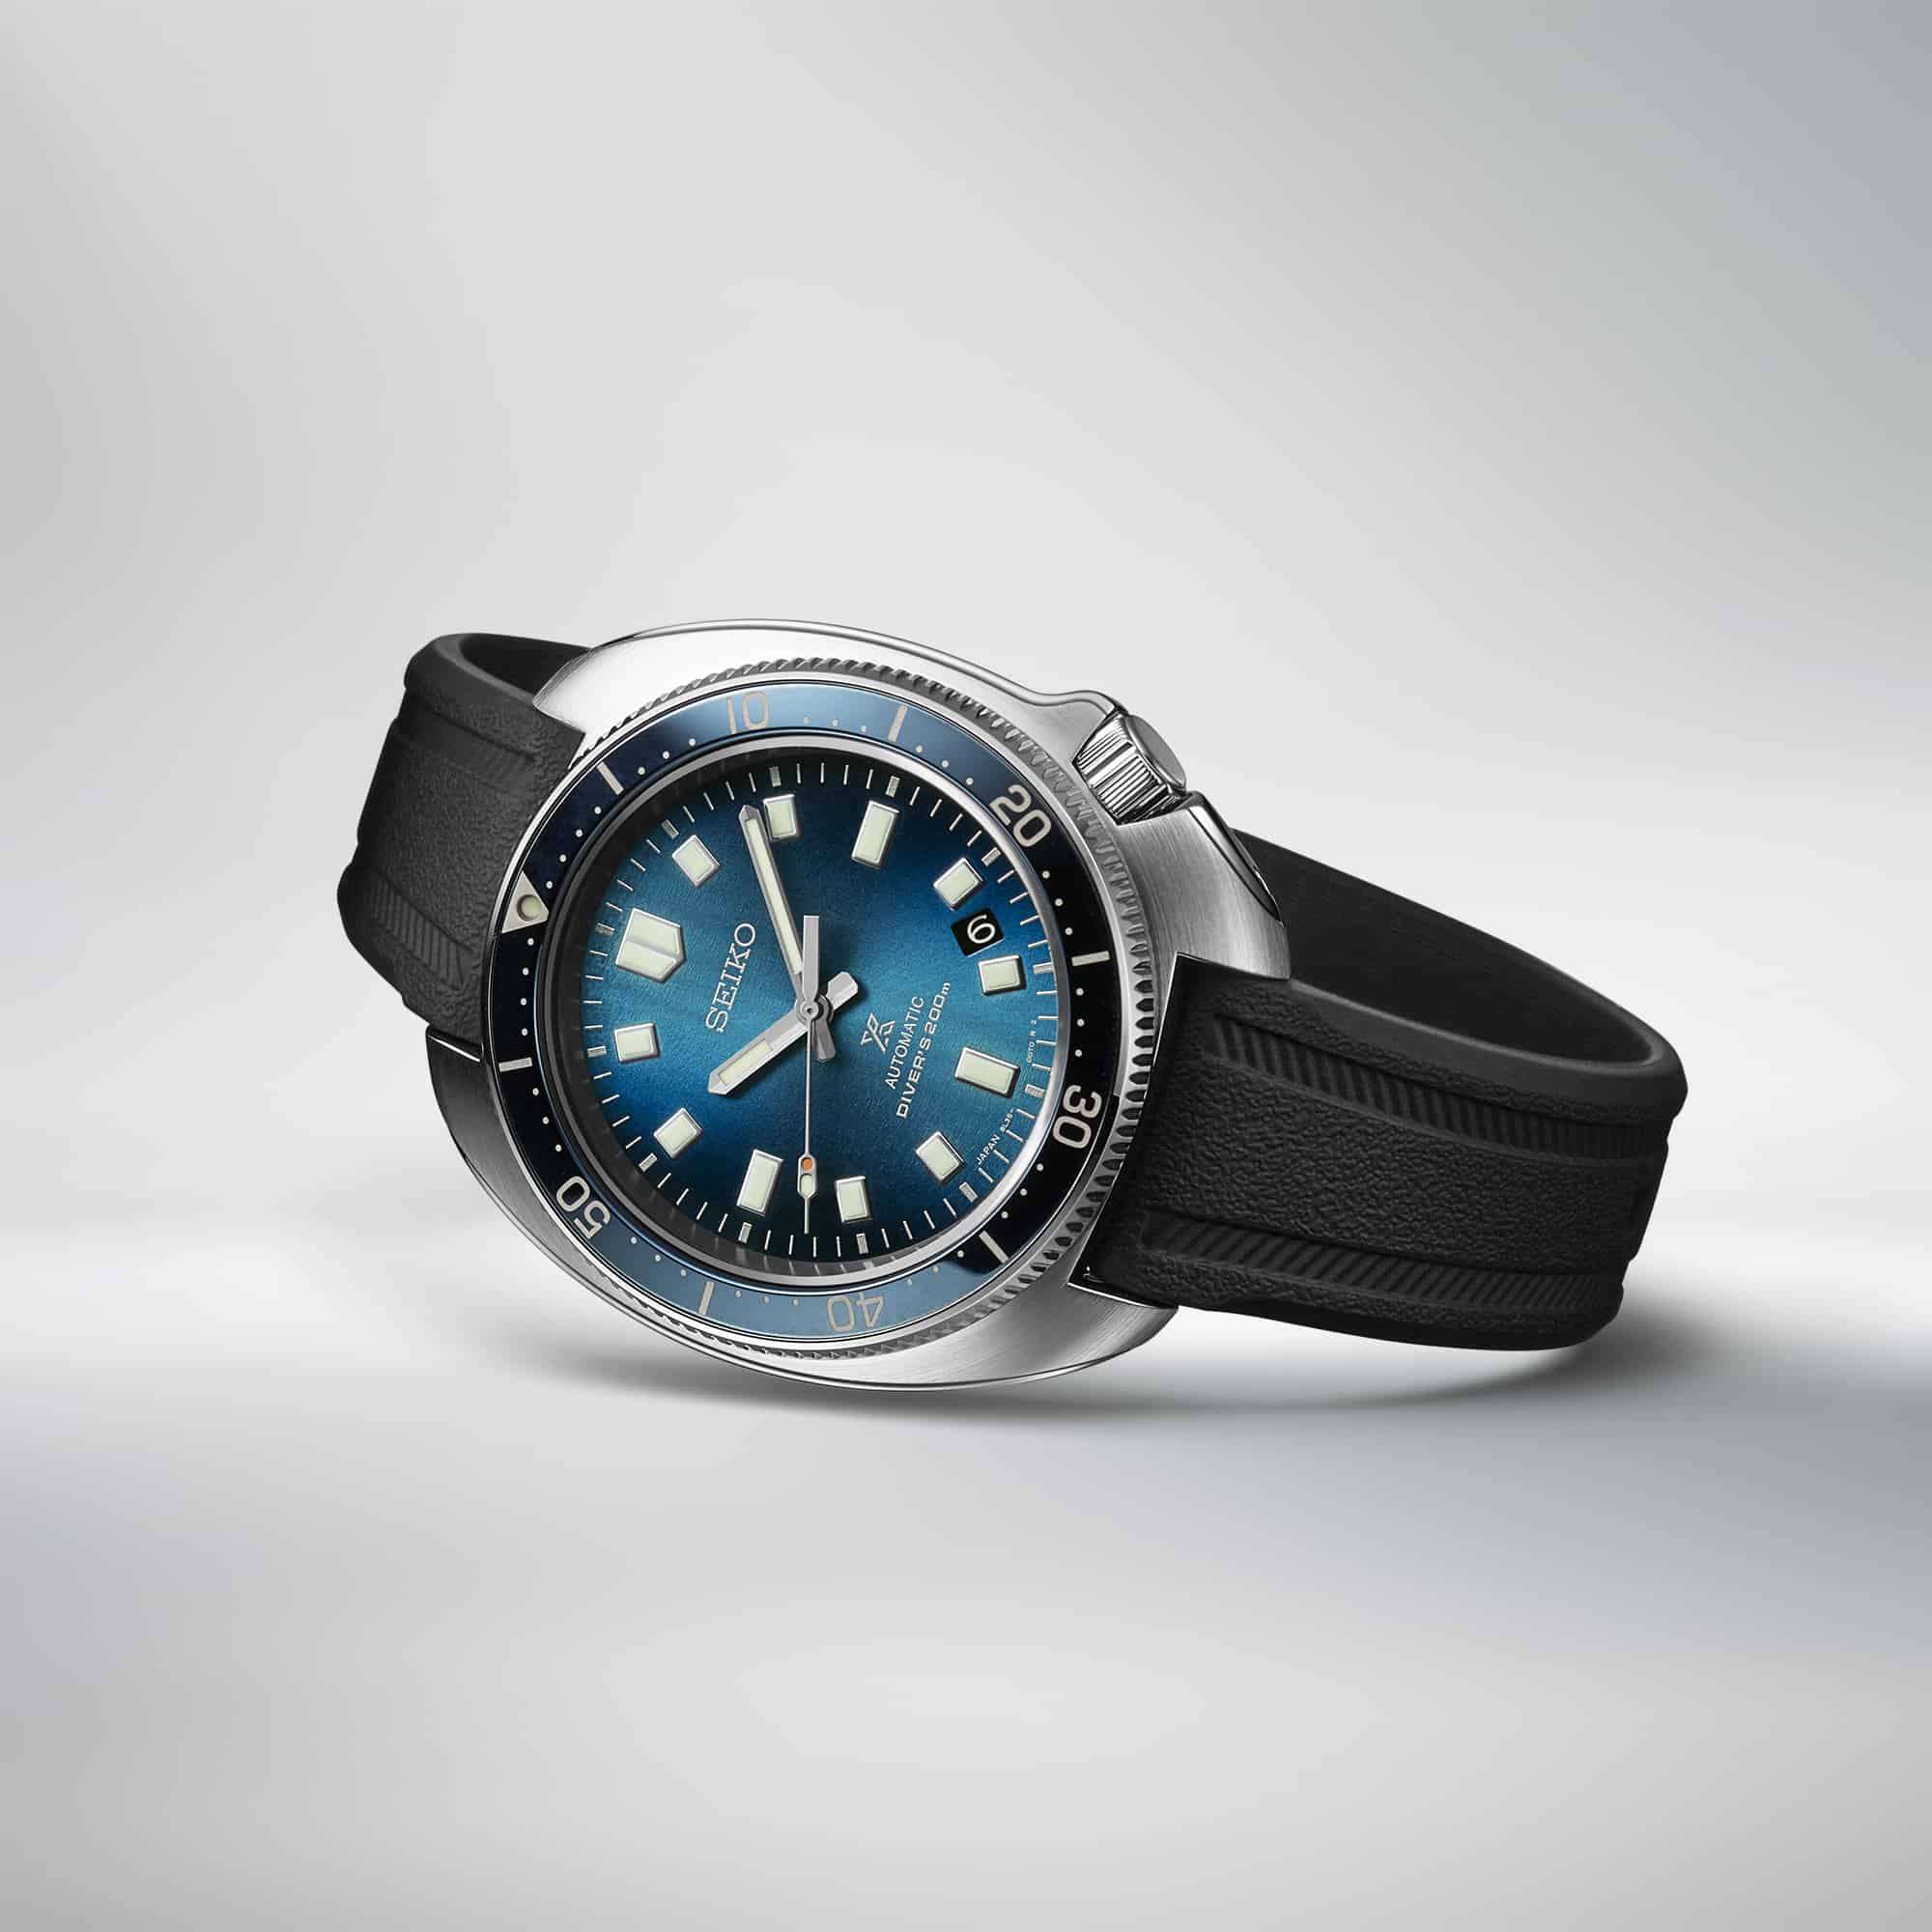 Seiko?s Latest Limited Edition Draws Inspiration From The Northern Lights With The SLA063